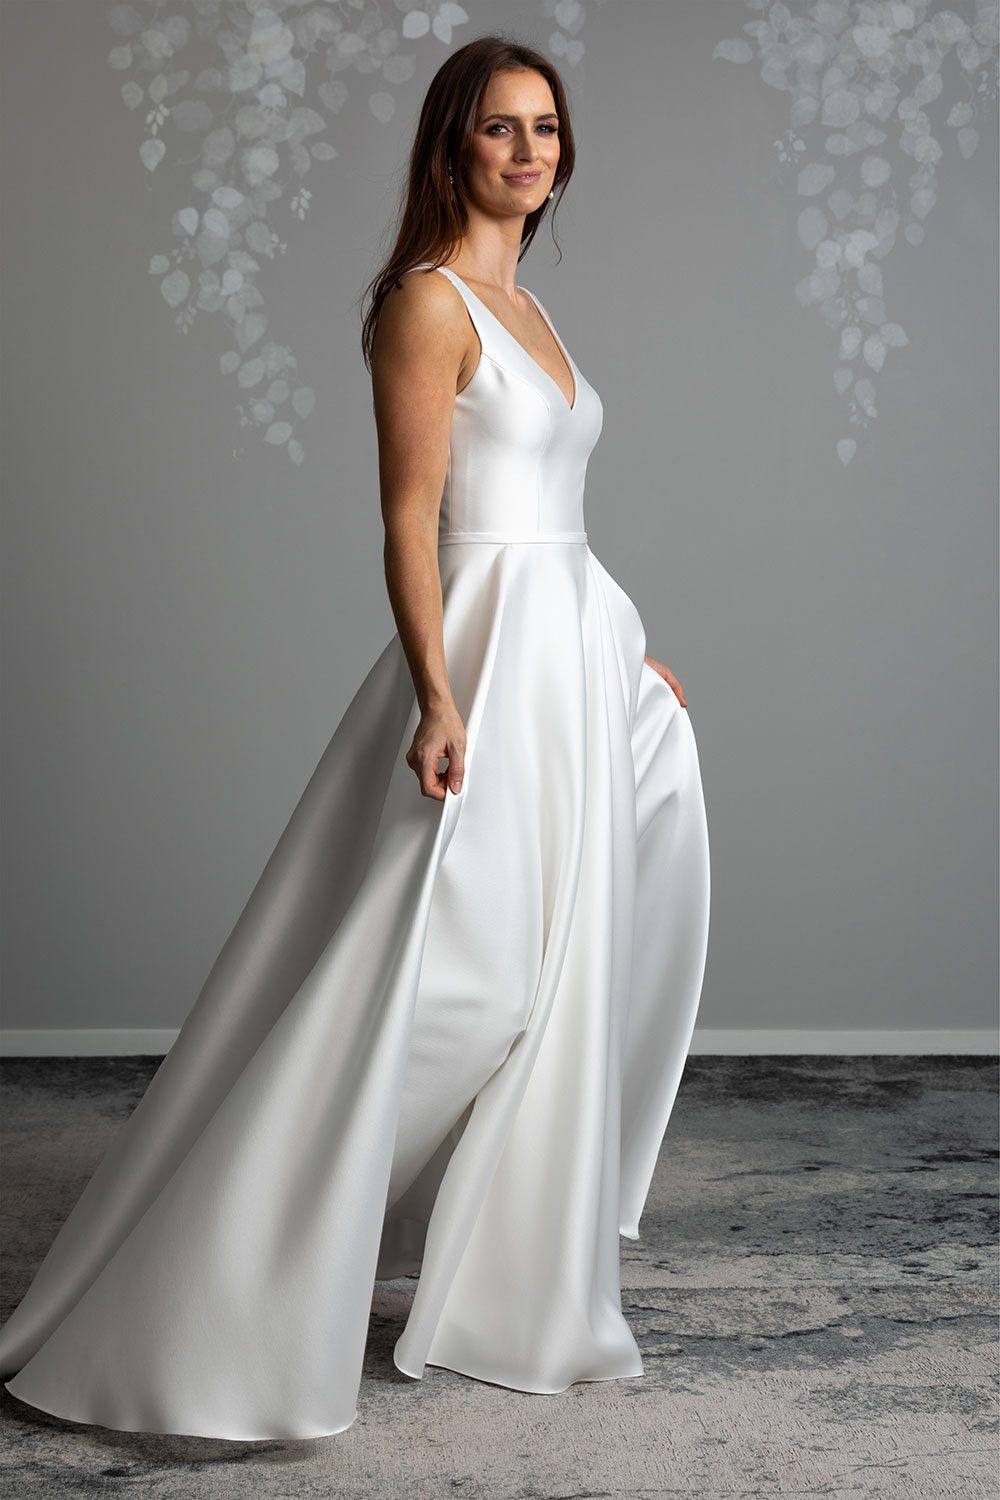 FlMadison Wedding gown from Vinka Design - This gown is both classic and contemporary, made beautifully with luxurious Mikado satin. The bodice is structured with a deep V-neckline and a squared, low back. Model showing profile view of gown highlighting the full skirt with irregular folds and fun and versatile pockets that fall elegantly into a sweeping train